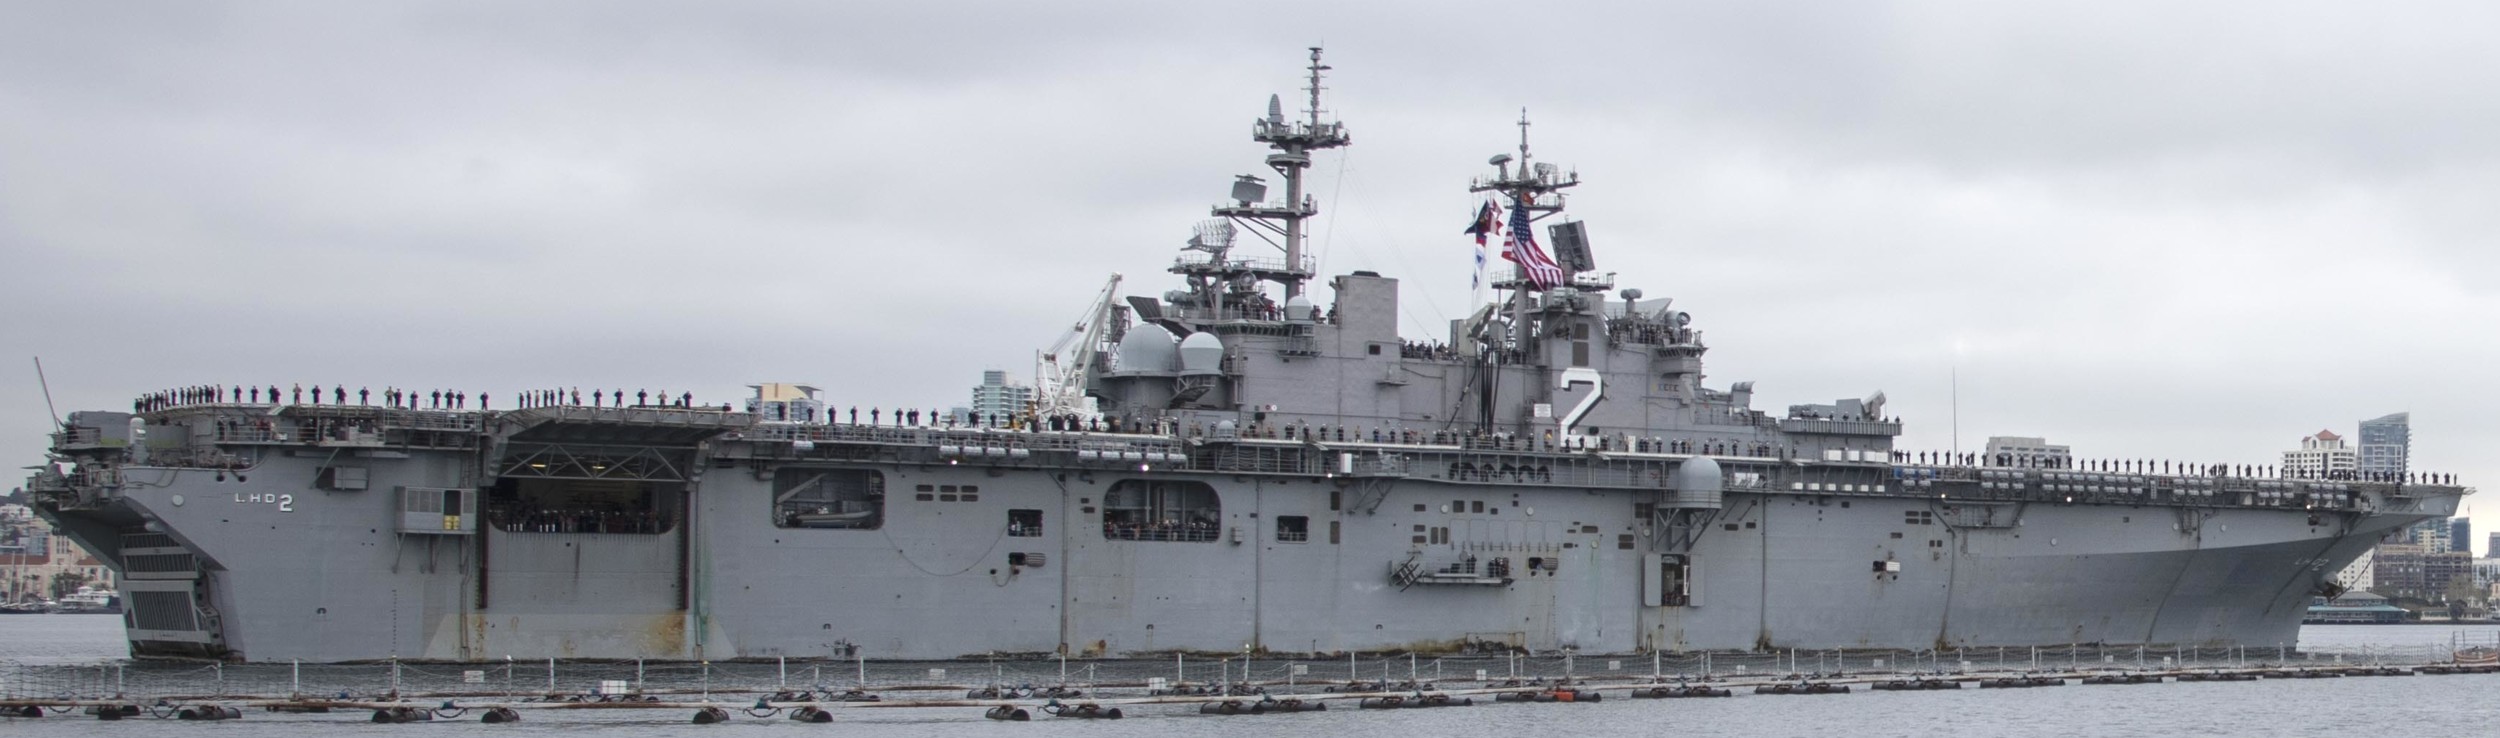 lhd-2 uss essex wasp class amphibious assault ship landing helicopter us navy marines returning naval base san diego 186